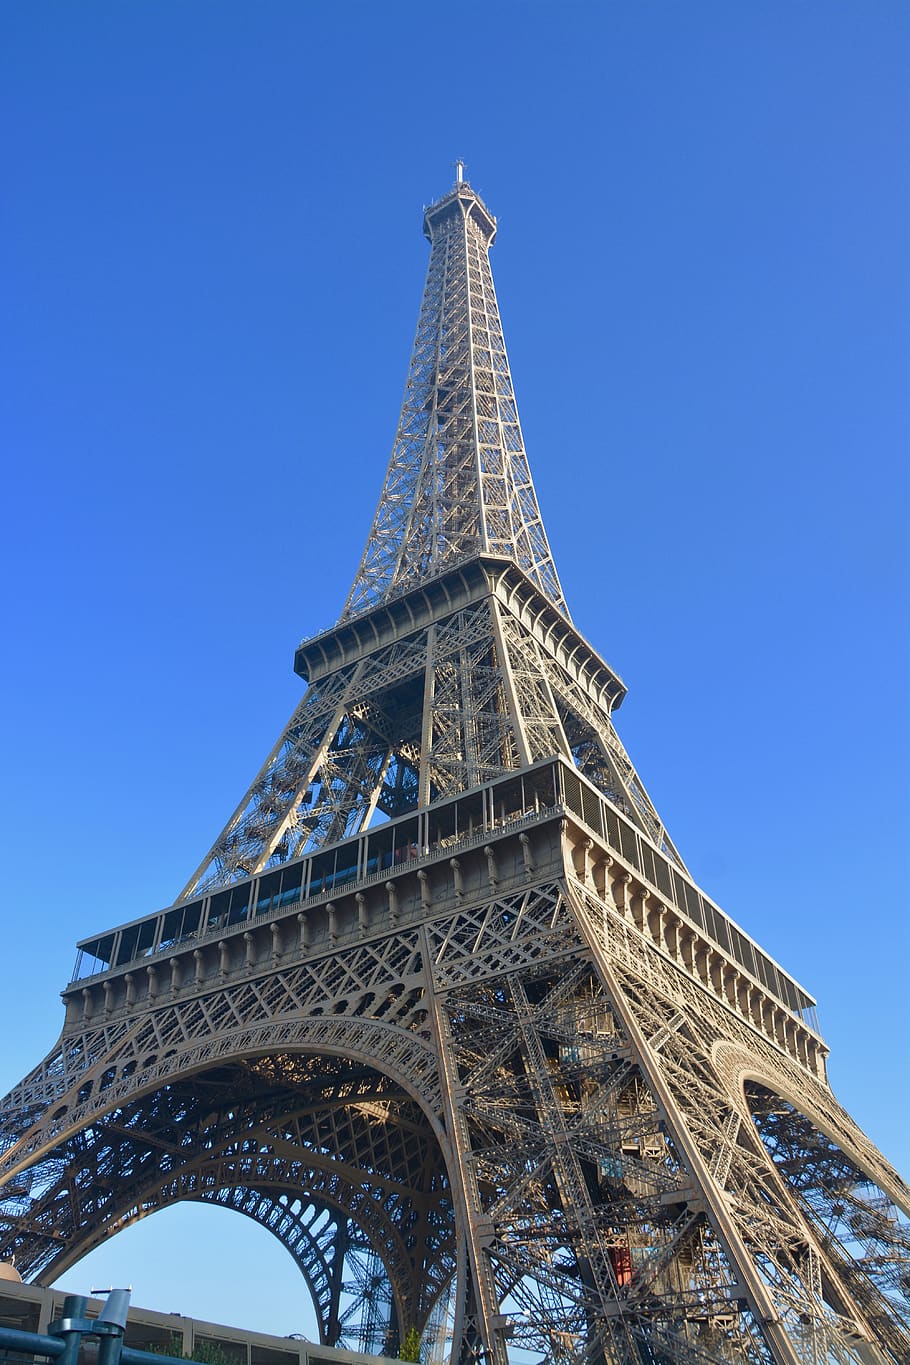 eiffel tower, paris is the capital of french, monument, heritage